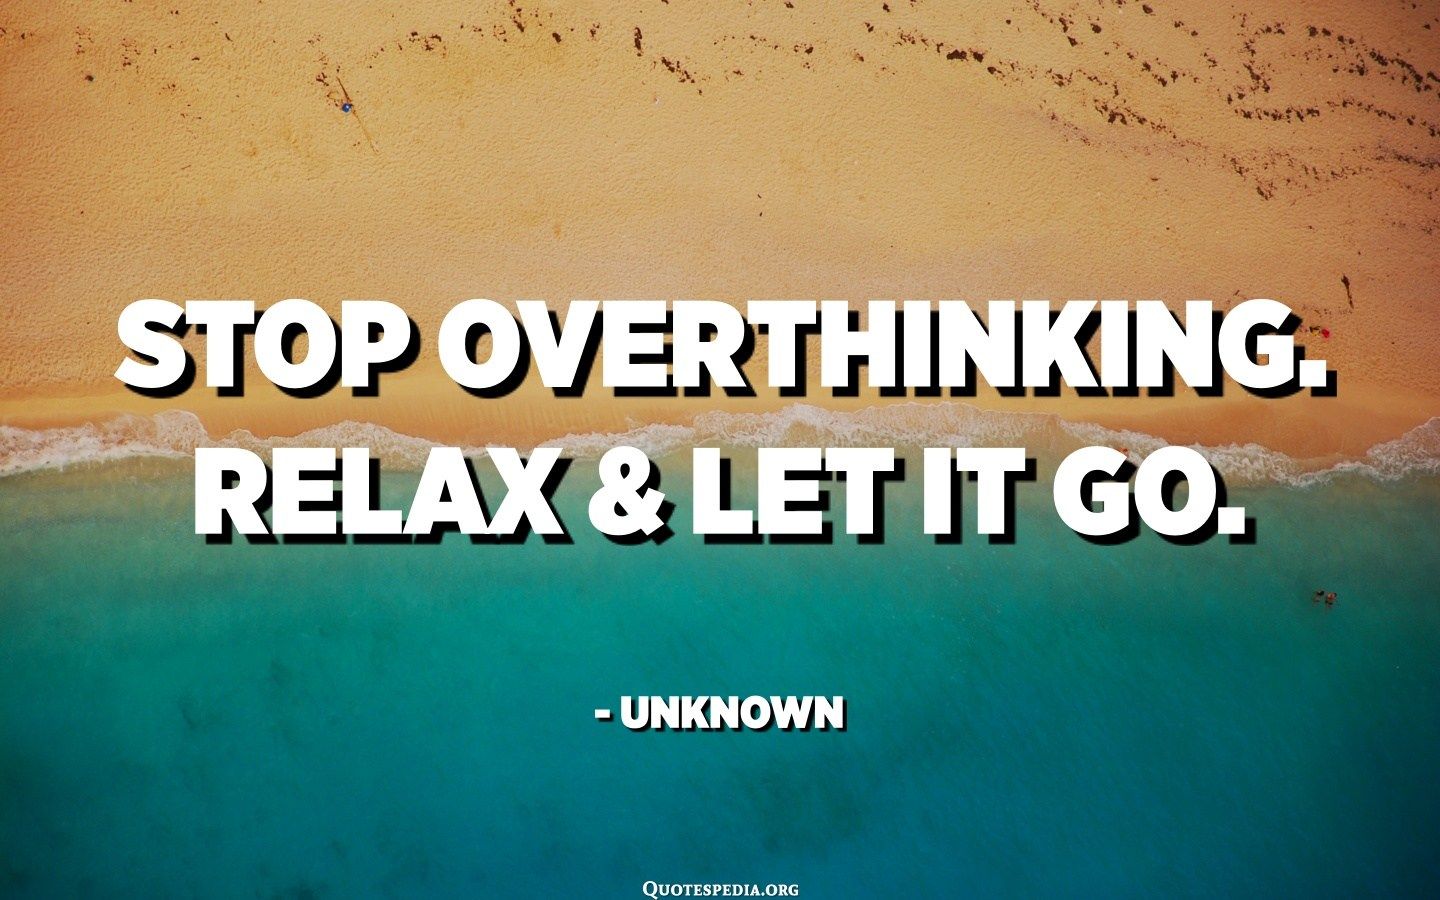 Stop overthinking. Relax and let it go